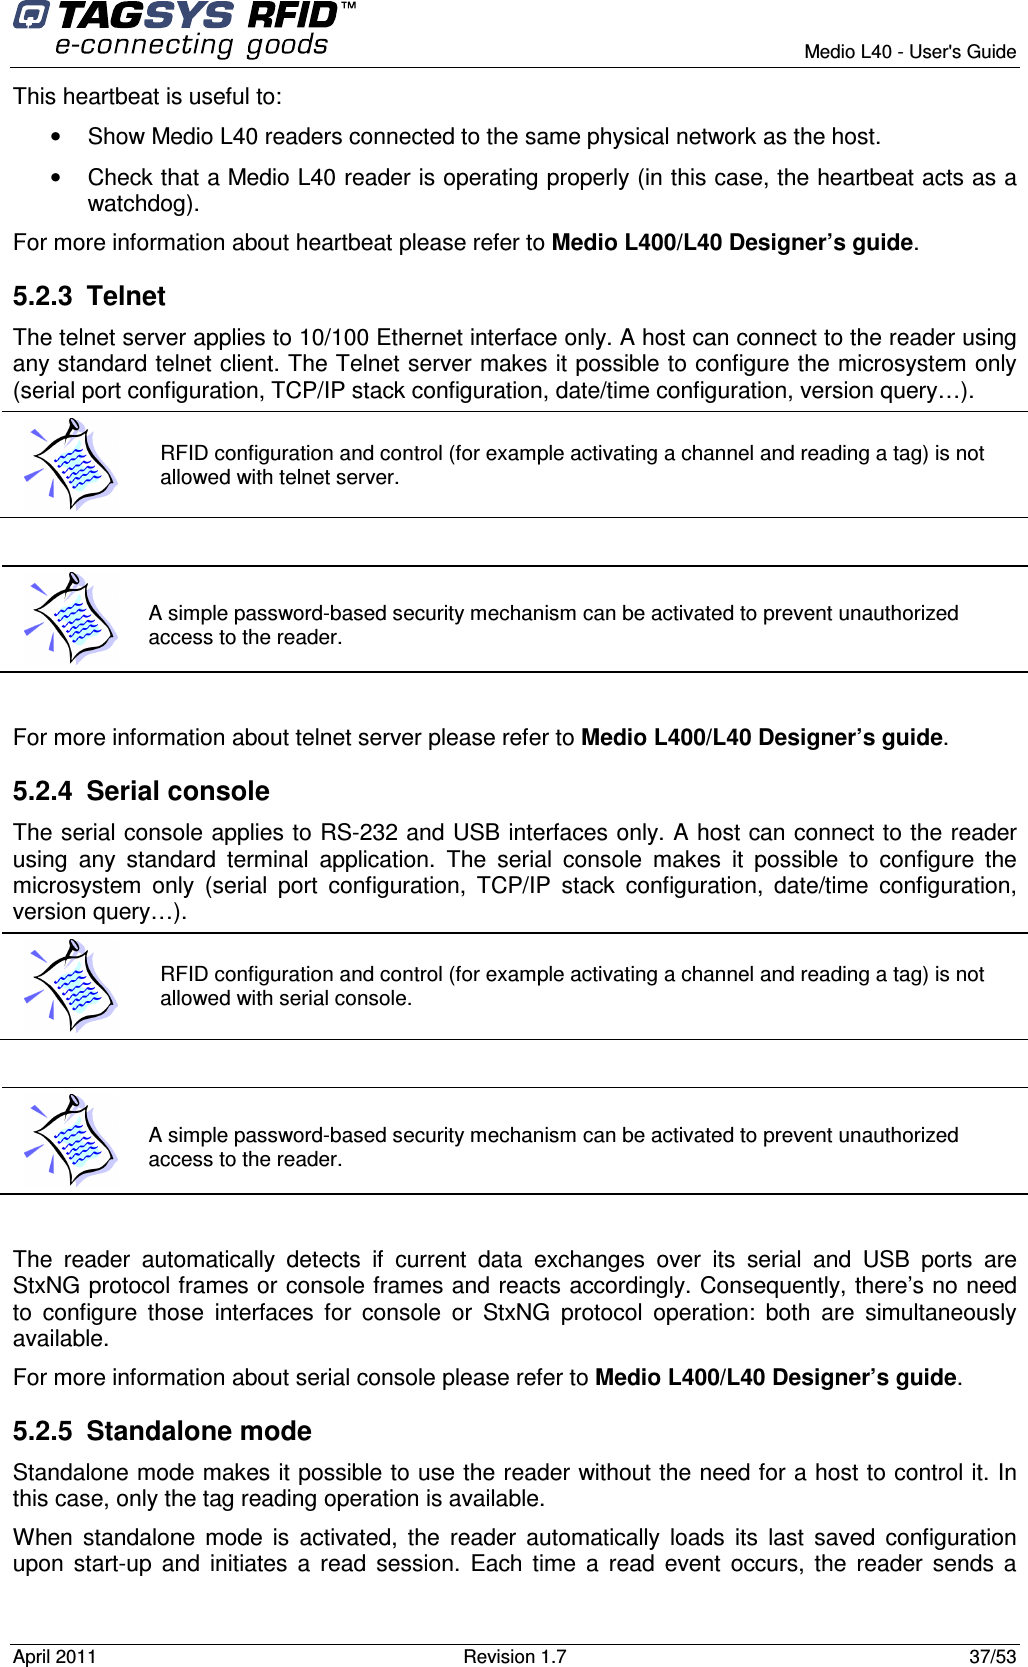        Medio L40 - User&apos;s Guide April 2011  Revision 1.7  37/53  This heartbeat is useful to:  •  Show Medio L40 readers connected to the same physical network as the host. •  Check that a Medio L40 reader is operating properly (in this case, the heartbeat acts as a watchdog). For more information about heartbeat please refer to Medio L400/L40 Designer’s guide. 5.2.3  Telnet  The telnet server applies to 10/100 Ethernet interface only. A host can connect to the reader using any standard telnet client. The Telnet server makes it possible to configure the microsystem only (serial port configuration, TCP/IP stack configuration, date/time configuration, version query…).   For more information about telnet server please refer to Medio L400/L40 Designer’s guide. 5.2.4  Serial console The serial console applies to RS-232 and USB interfaces only. A host can connect to the reader using  any  standard  terminal  application.  The  serial  console  makes  it  possible  to  configure  the microsystem  only  (serial  port  configuration,  TCP/IP  stack  configuration,  date/time  configuration, version query…).   The  reader  automatically  detects  if  current  data  exchanges  over  its  serial  and  USB  ports  are StxNG protocol frames or console frames and reacts accordingly. Consequently, there’s no need to  configure  those  interfaces  for  console  or  StxNG  protocol  operation:  both  are  simultaneously available. For more information about serial console please refer to Medio L400/L40 Designer’s guide. 5.2.5  Standalone mode Standalone mode makes it possible to use the reader without the need for a host to control it. In this case, only the tag reading operation is available. When  standalone mode  is  activated, the  reader automatically loads  its  last  saved  configuration upon start-up  and  initiates a read  session.  Each time  a read  event  occurs,  the  reader sends a  RFID configuration and control (for example activating a channel and reading a tag) is not allowed with telnet server.  A simple password-based security mechanism can be activated to prevent unauthorized access to the reader.  RFID configuration and control (for example activating a channel and reading a tag) is not allowed with serial console.  A simple password-based security mechanism can be activated to prevent unauthorized access to the reader. 